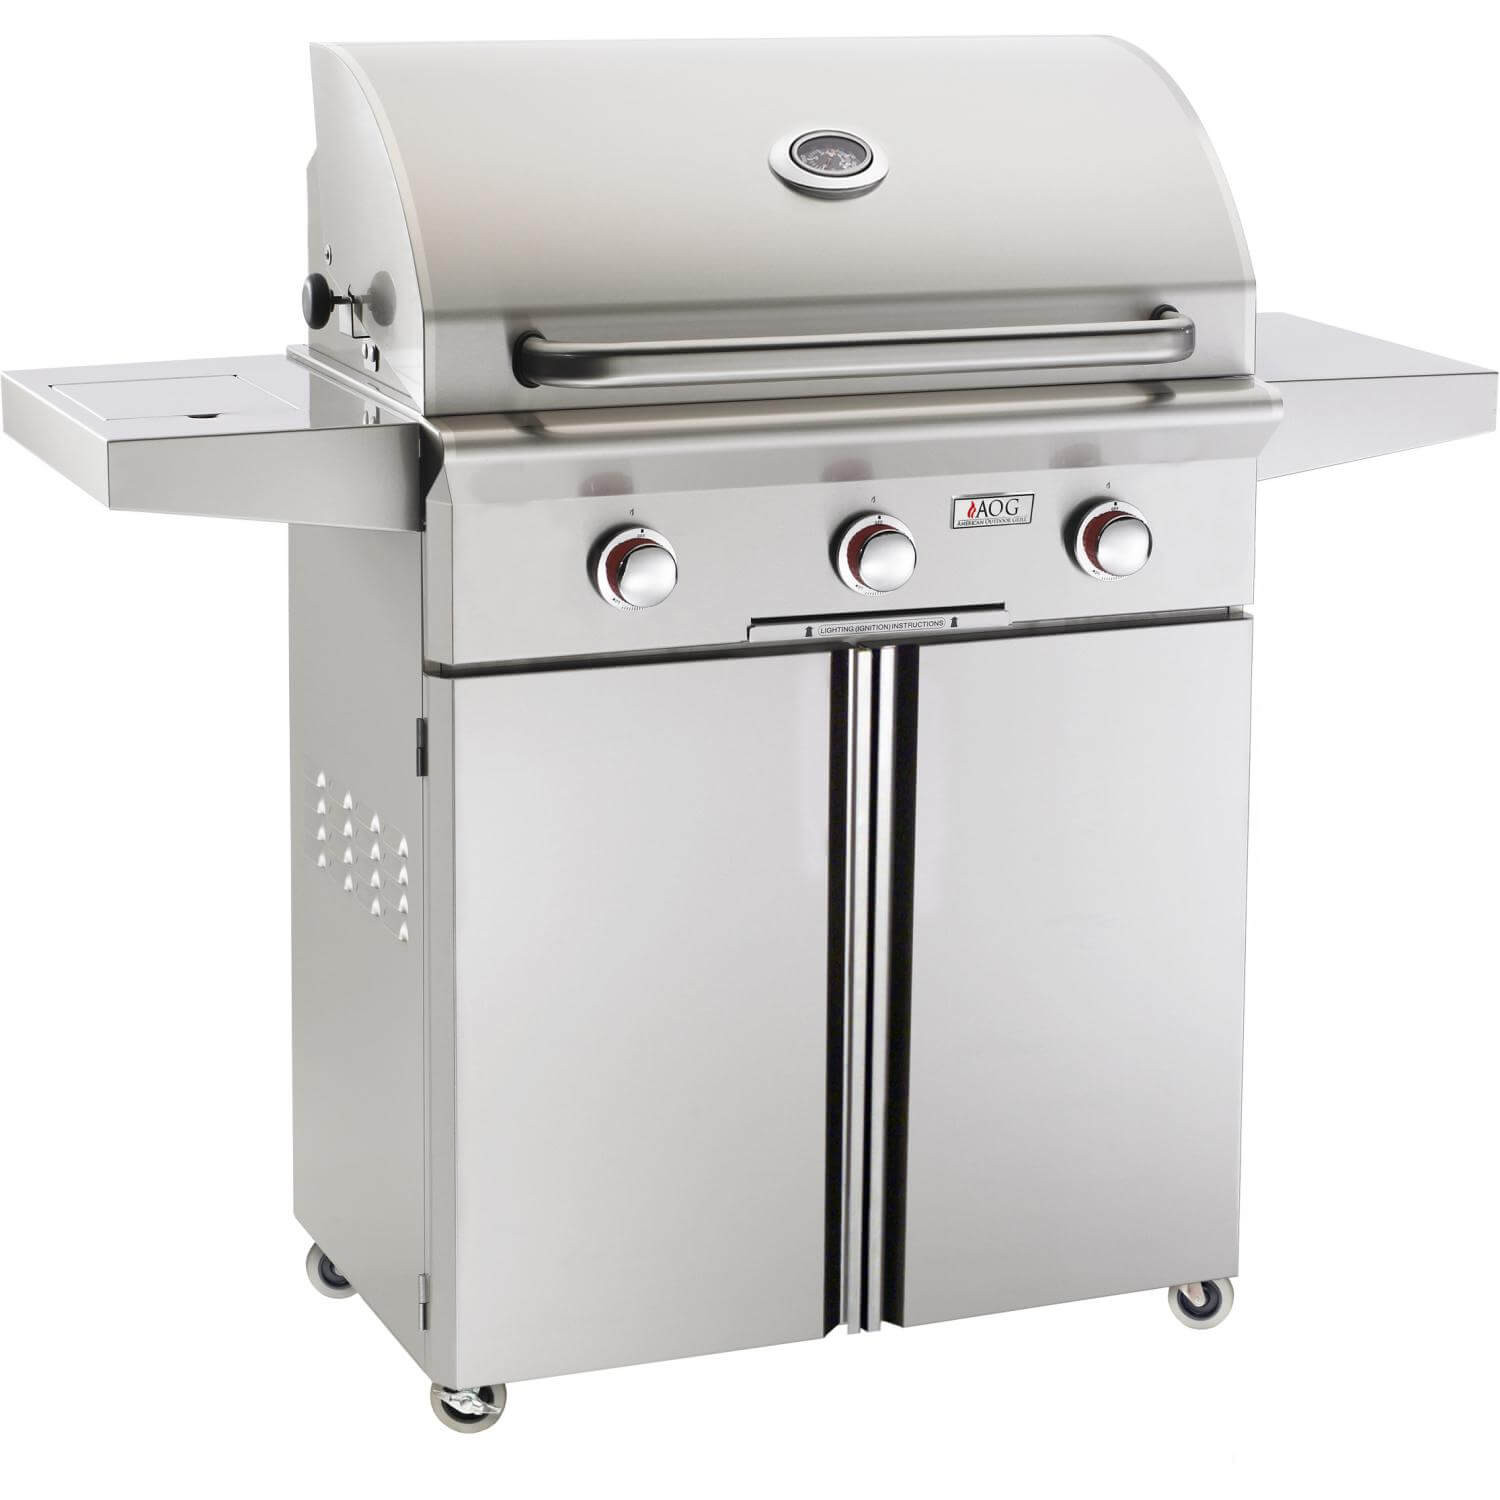 Backyard Grill Grills
 American Outdoor Grills T Series 30″ Freestanding Grill